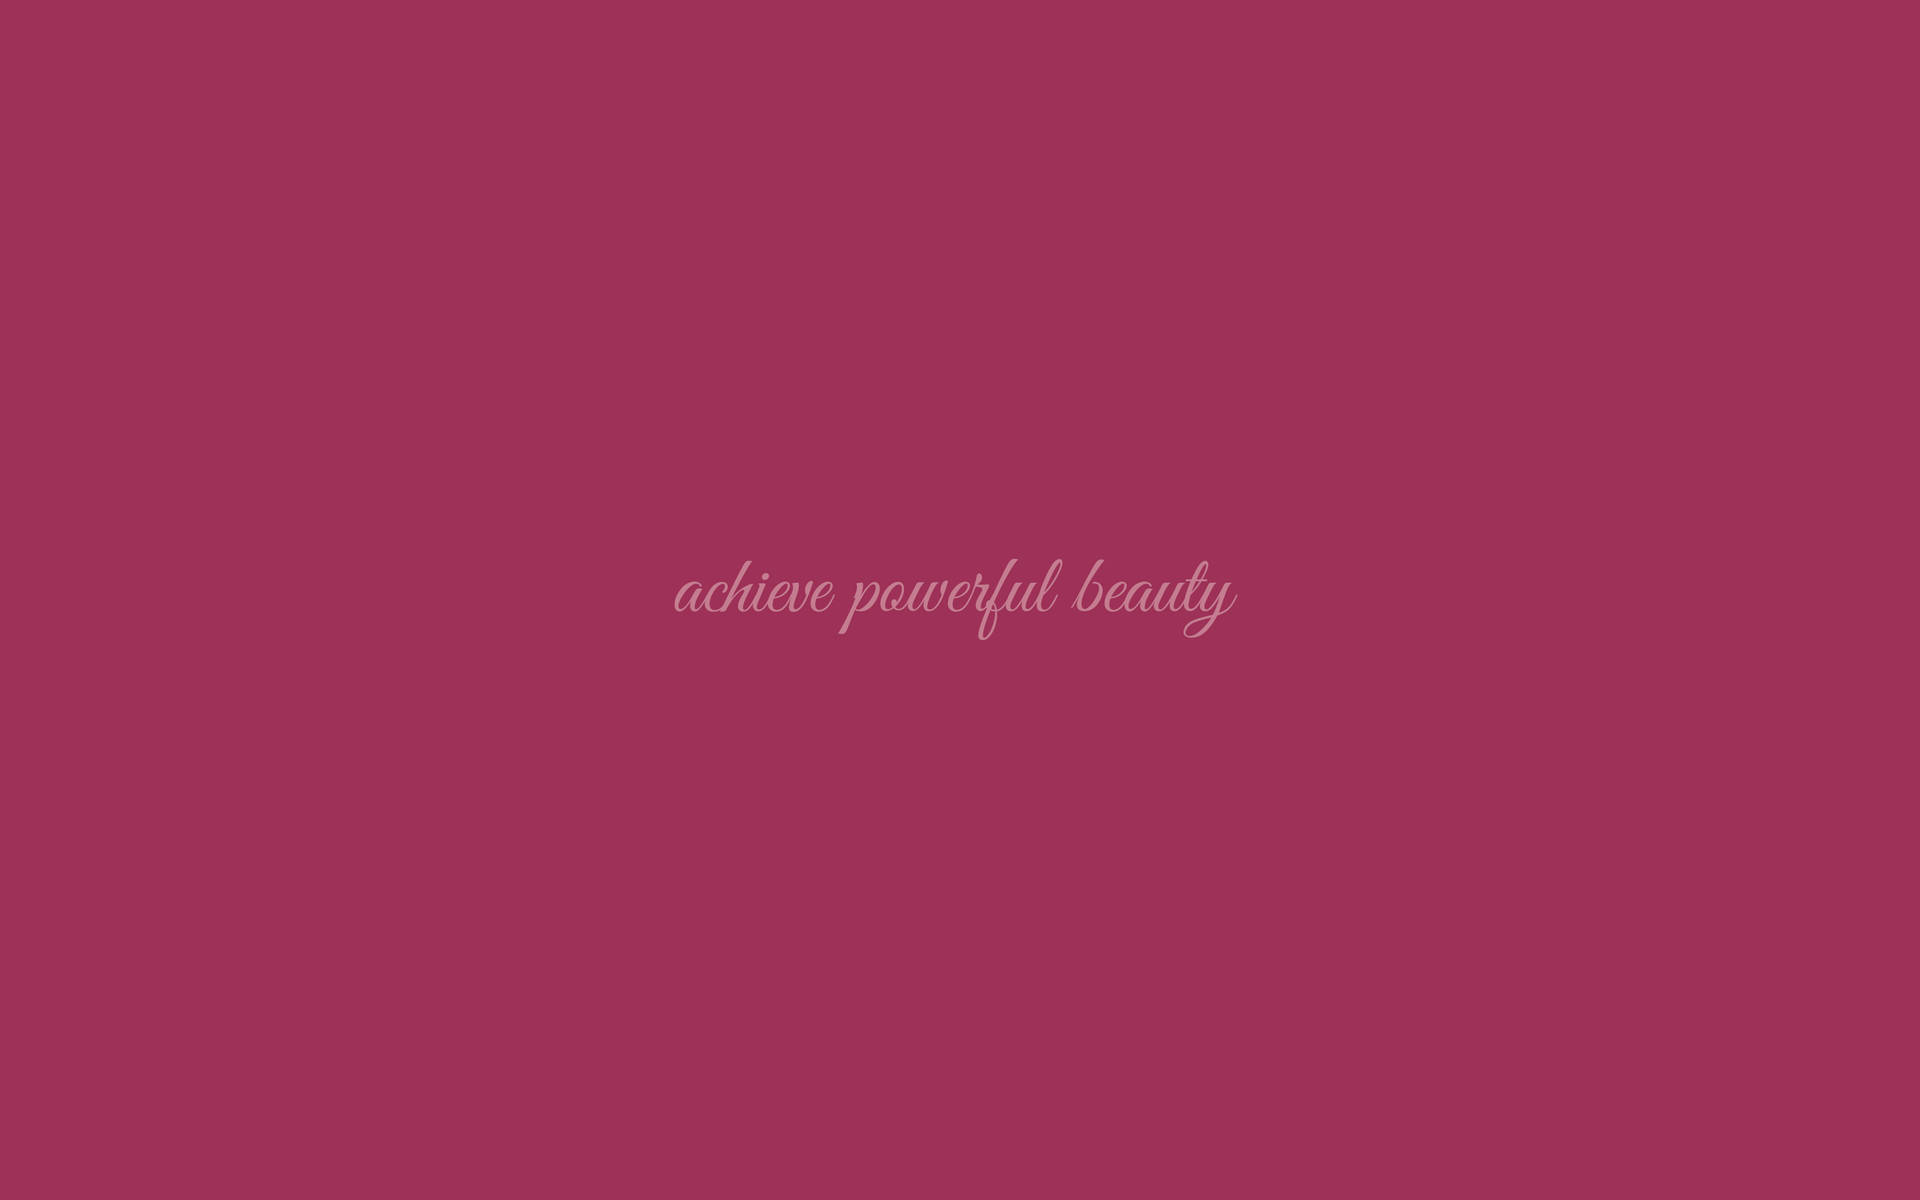 Baddie Aesthetic Quote In Maroon Background